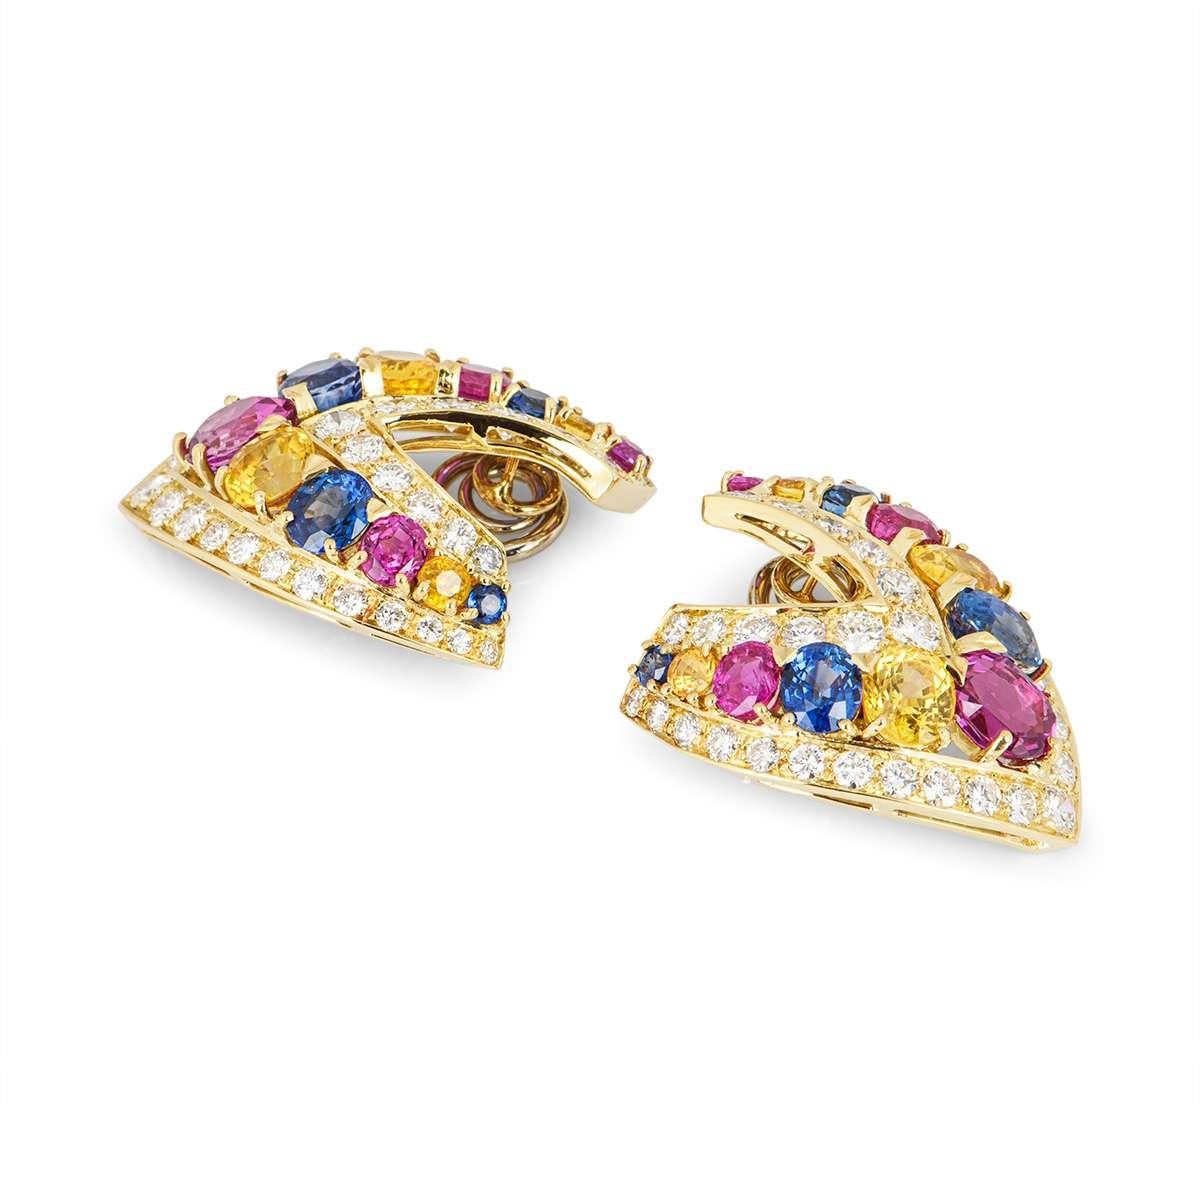 An eye-catching pair of 18k yellow gold clip earrings. The earrings are V shaped and are set in the centre with an array of coloured sapphires, including pink, blue and yellow. There is a boarder of round brilliant cut diamonds set on either side of